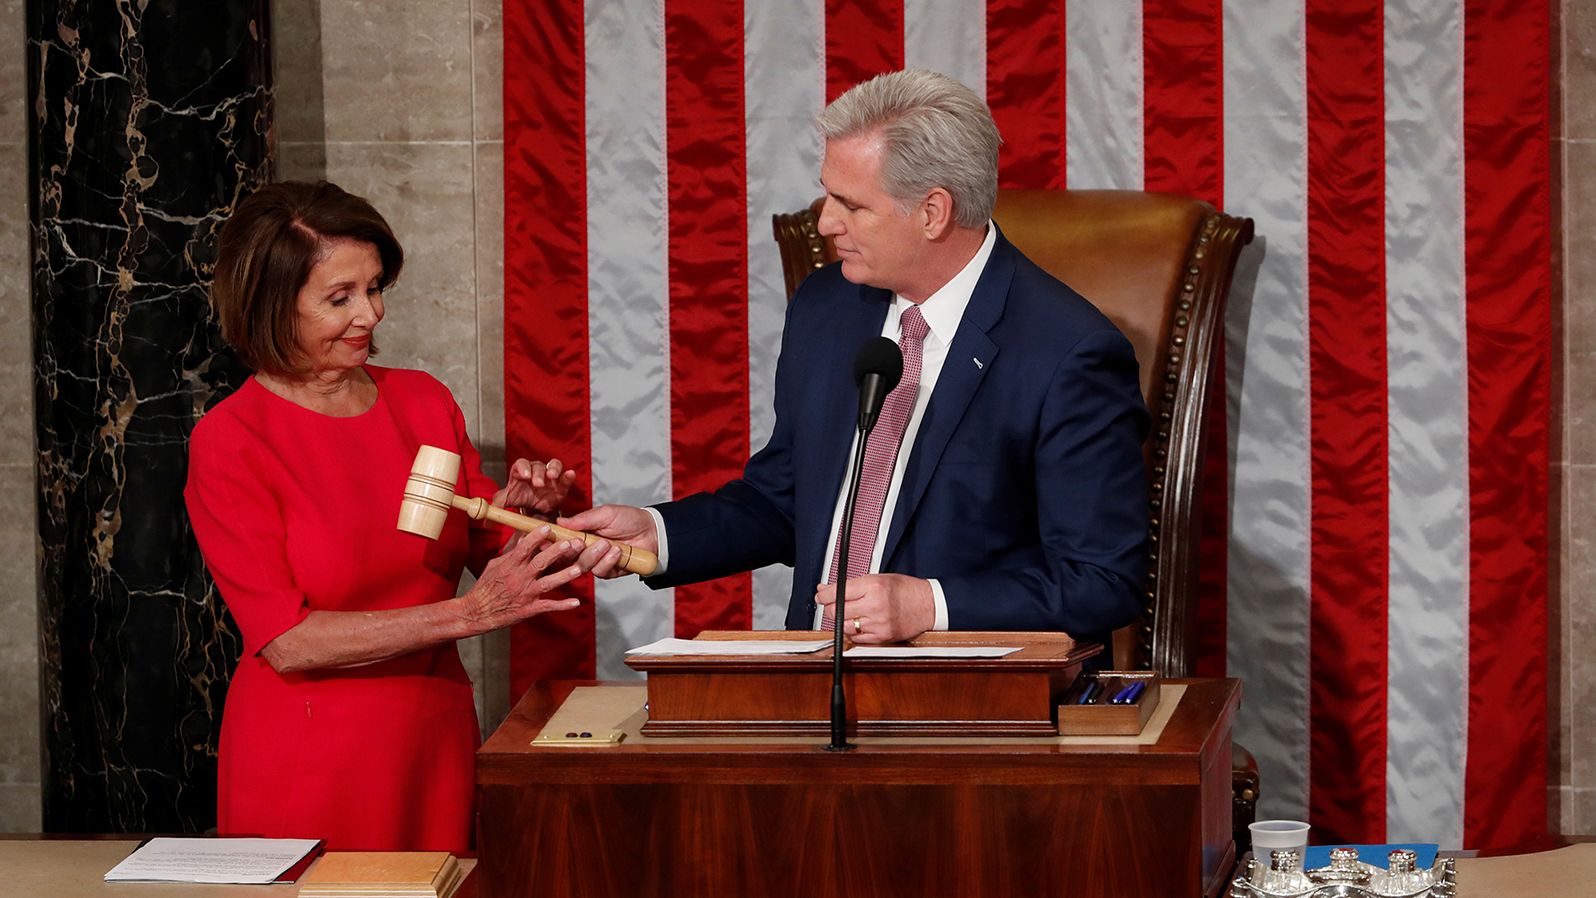 Pelosi, the new House speaker, is handed the gavel by McCarthy, the new House minority leader, at the start of the 116th Congress in January 2019.